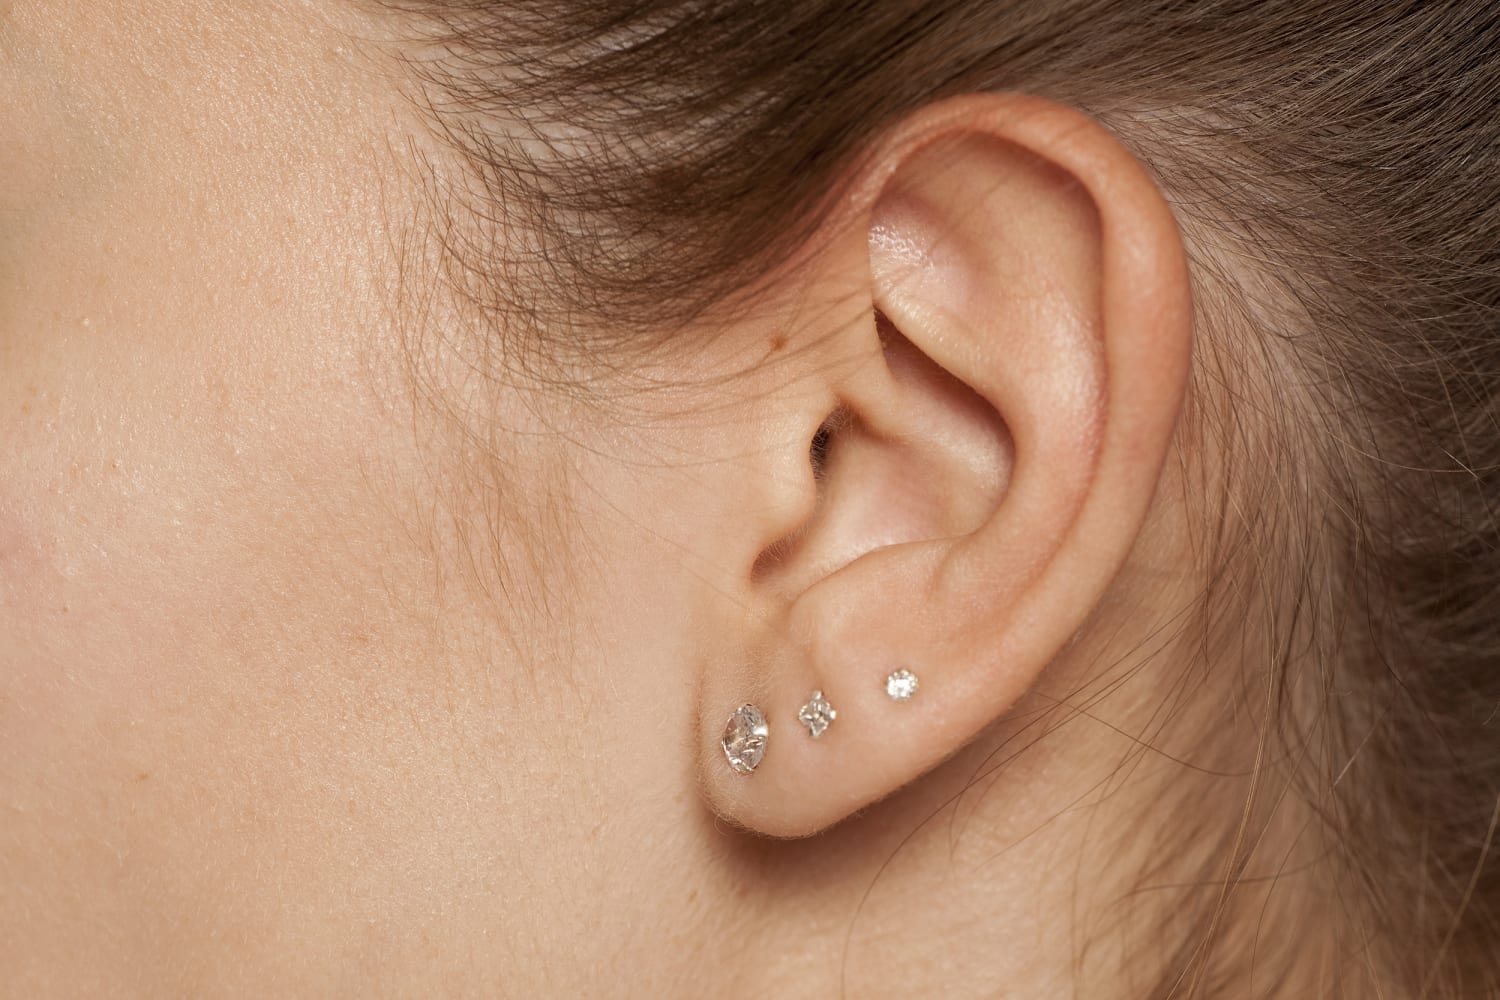 Discover The Secret To Shrinking Pierced Ears In Just 8 Weeks!